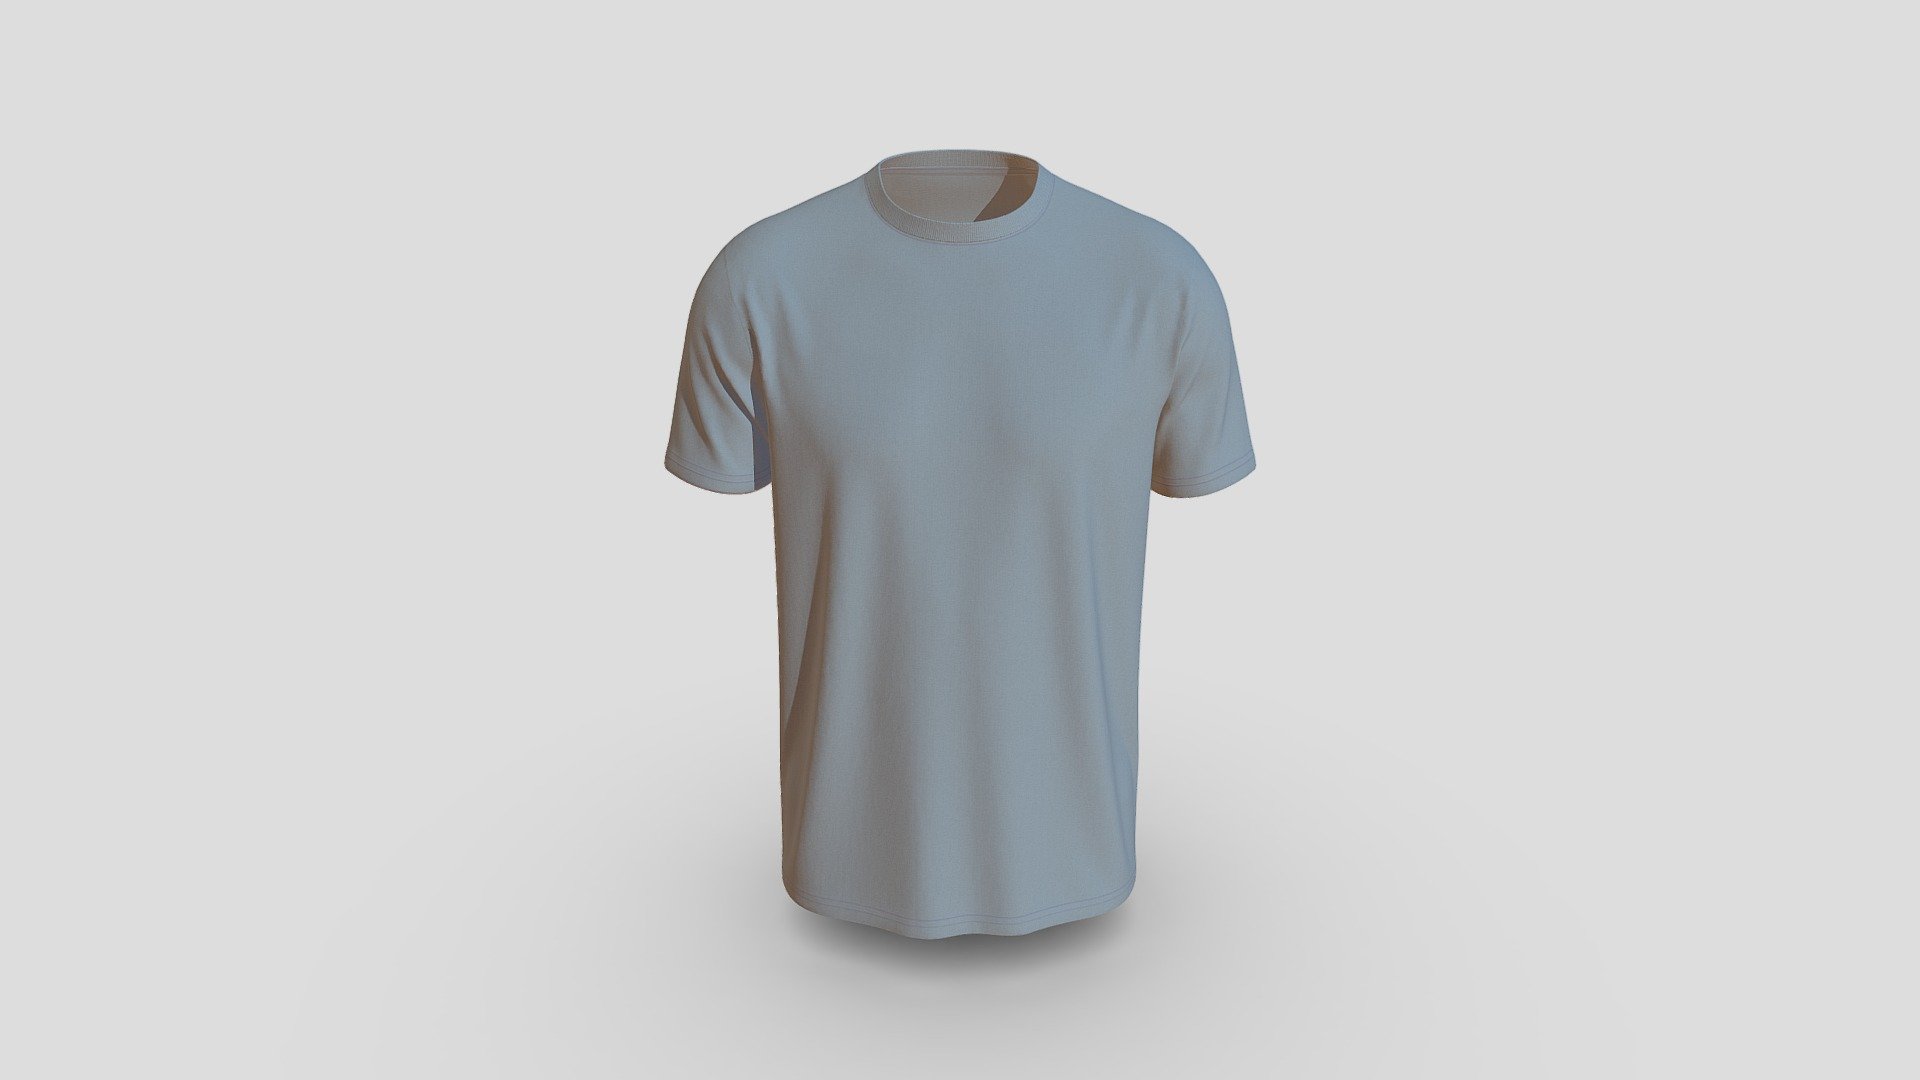 Cloth Title = Comfortable round neck T-Shirts Design  

SKU = DG100132 

Category = Unisex 

Product Type = Tee 

Cloth Length = Regular 

Body Fit = Regular Fit 

Occasion = Casual  

Sleeve Style = Set In Sleeve 


Our Services:

3D Apparel Design.

OBJ,FBX,GLTF Making with High/Low Poly.

Fabric Digitalization.

Mockup making.

3D Teck Pack.

Pattern Making.

2D Illustration.

Cloth Animation and 360 Spin Video.


Contact us:- 

Email: info@digitalfashionwear.com 

Website: https://digitalfashionwear.com 


We designed all the types of cloth specially focused on product visualization, e-commerce, fitting, and production. 

We will design: 

T-shirts 

Polo shirts 

Hoodies 

Sweatshirt 

Jackets 

Shirts 

TankTops 

Trousers 

Bras 

Underwear 

Blazer 

Aprons 

Leggings 

and All Fashion items. 





Our goal is to make sure what we provide you, meets your demand 3d model